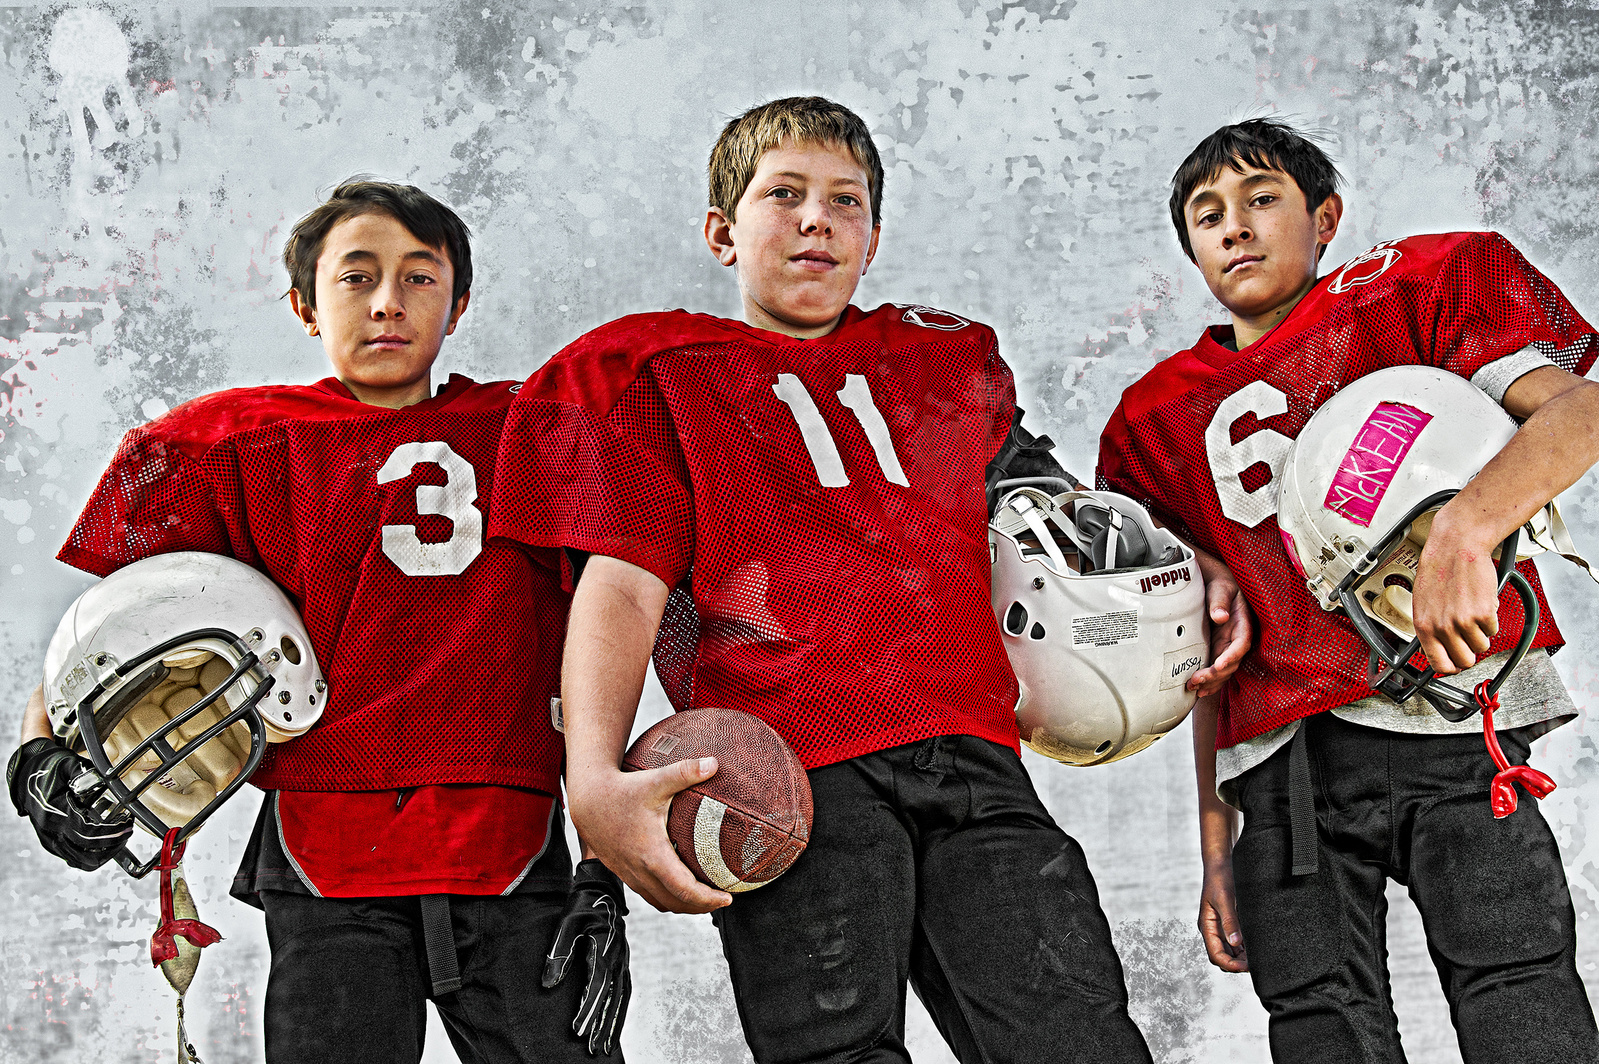 Three young football players in red jerseys looking tough for the camera.